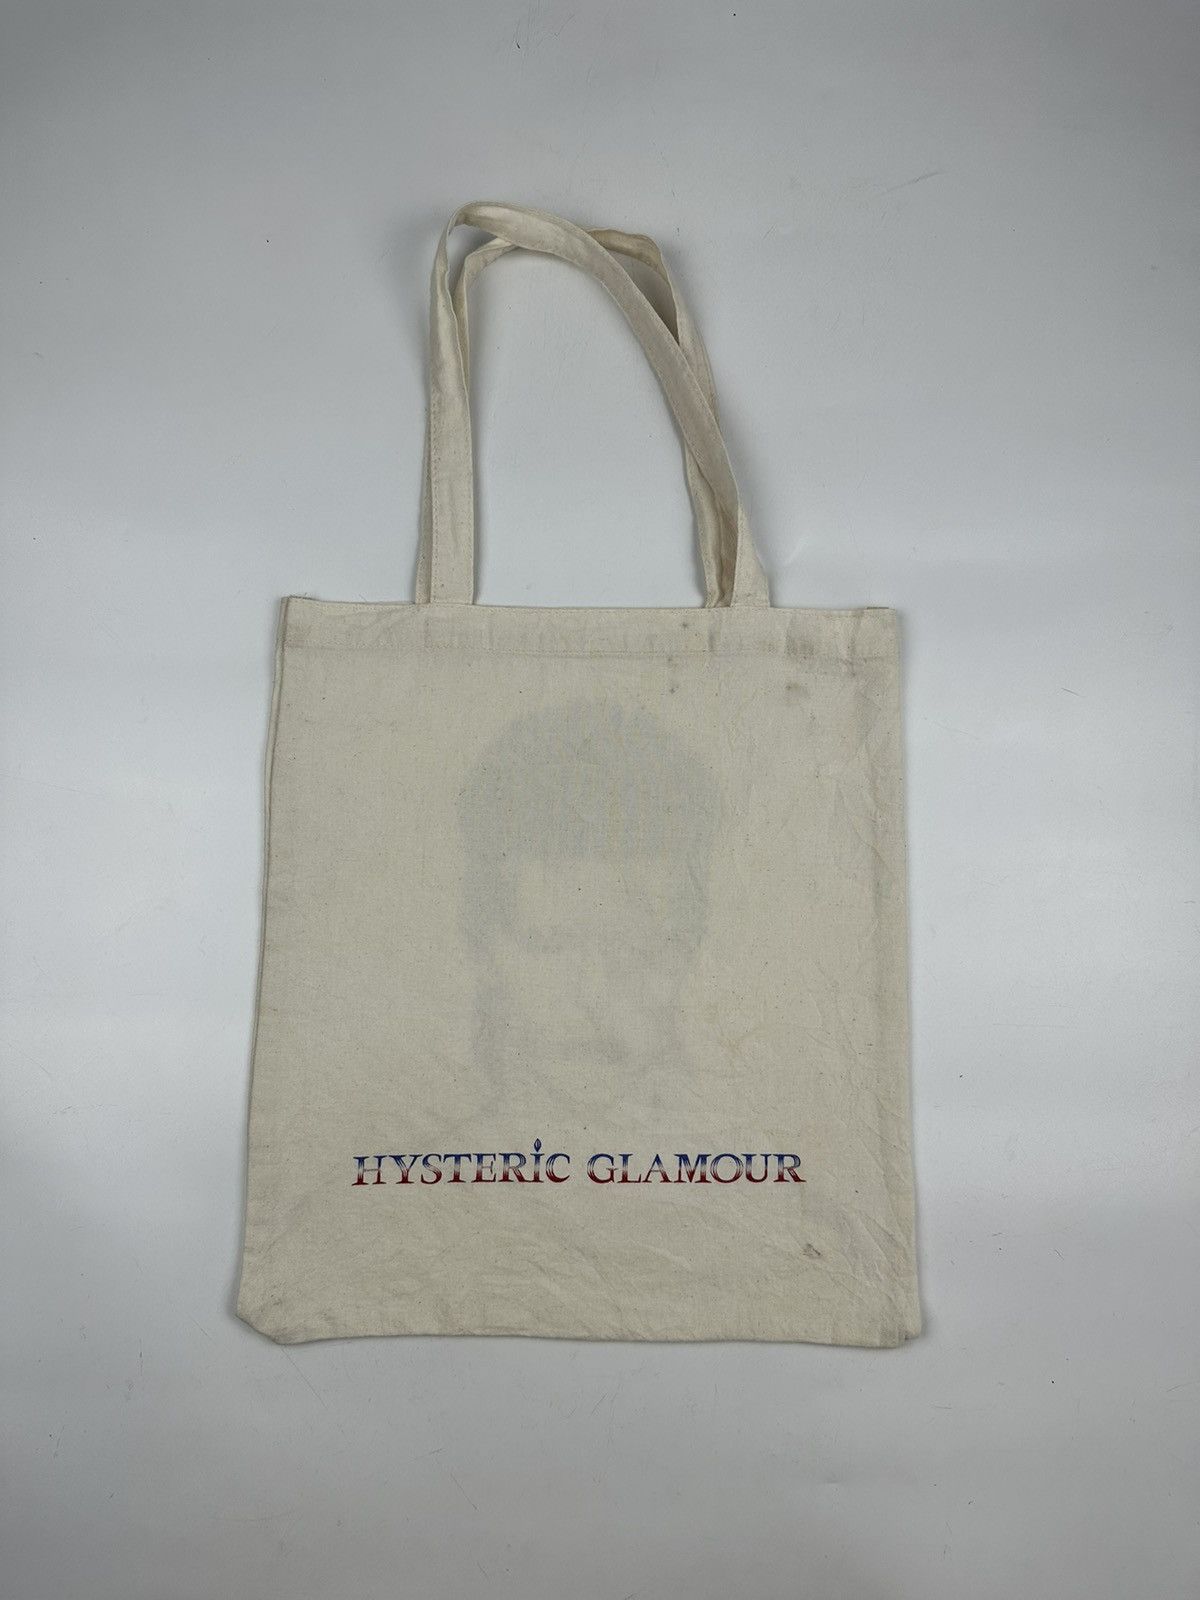 david bowie X hysteric glamour tote bag - 4